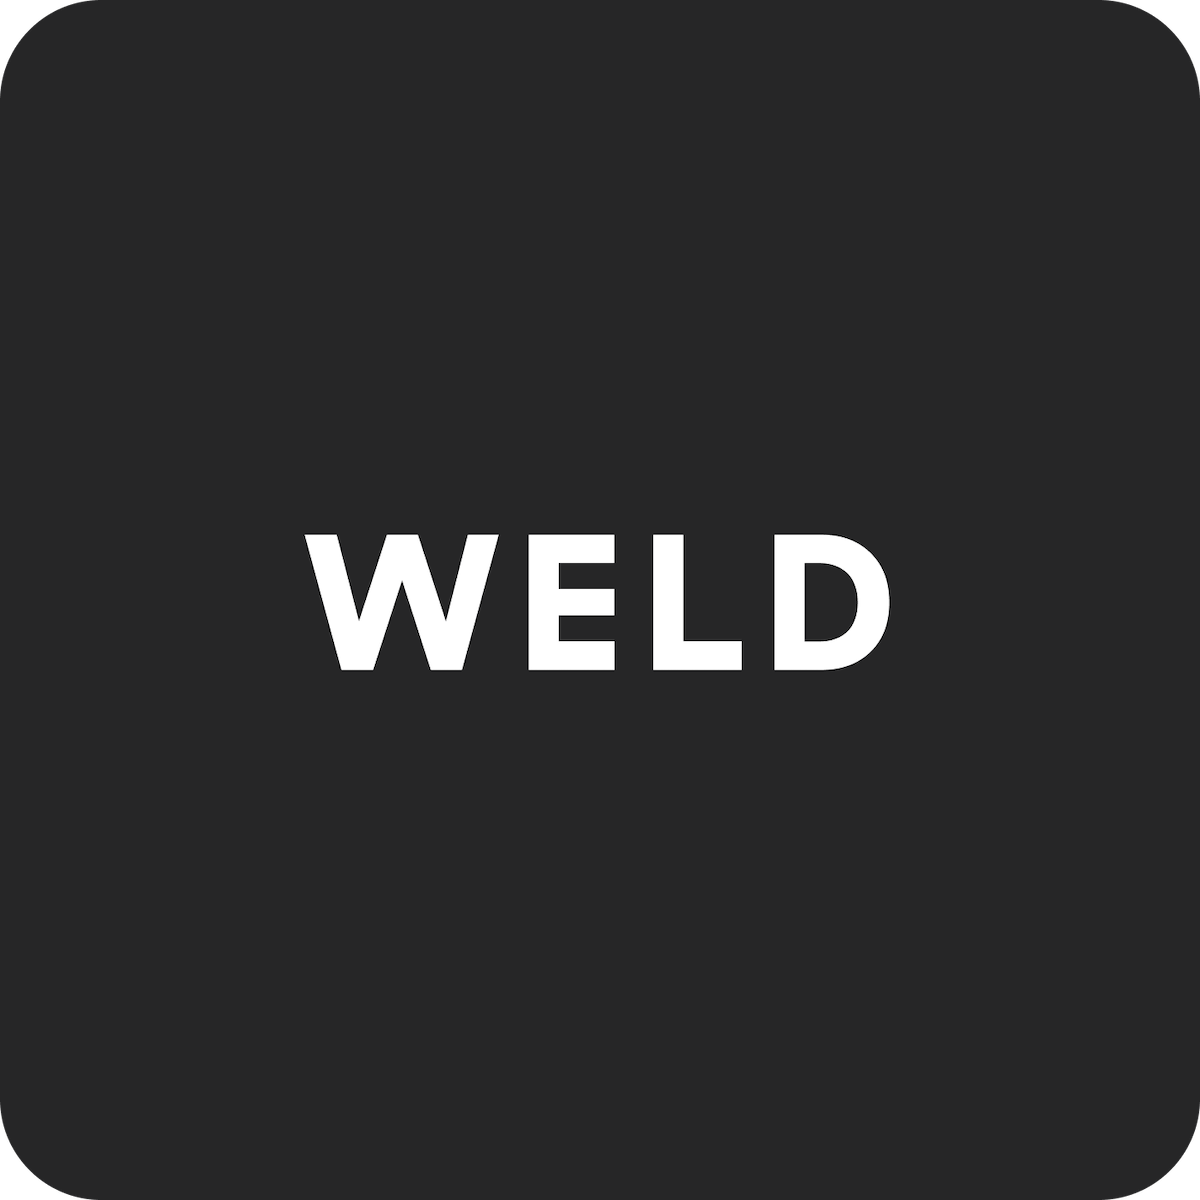 Hire Shopify Experts to integrate Weld app into a Shopify store